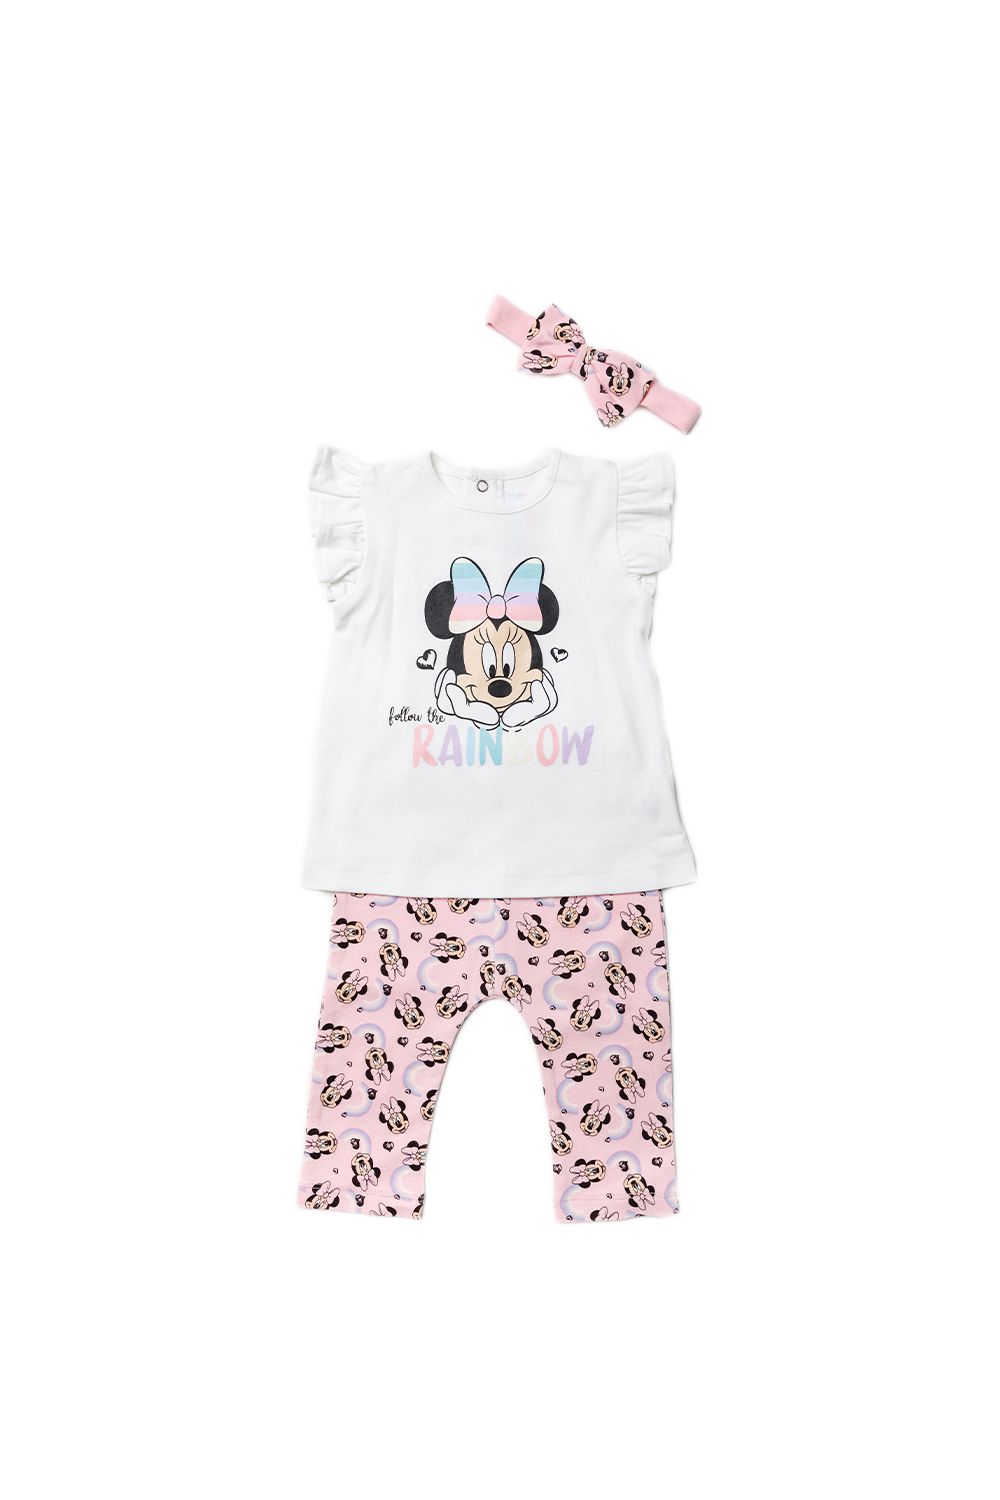 This adorable Disney Baby three-piece set features a rainbow themed Minnie Mouse print. The set includes a printed t-shirt, a pair of baby-pink, all-over print leggings and a matching headband! Each item in the set is cotton, keeping your little one comfortable. This would be a lovely gift or addition to your little ones wardrobe!